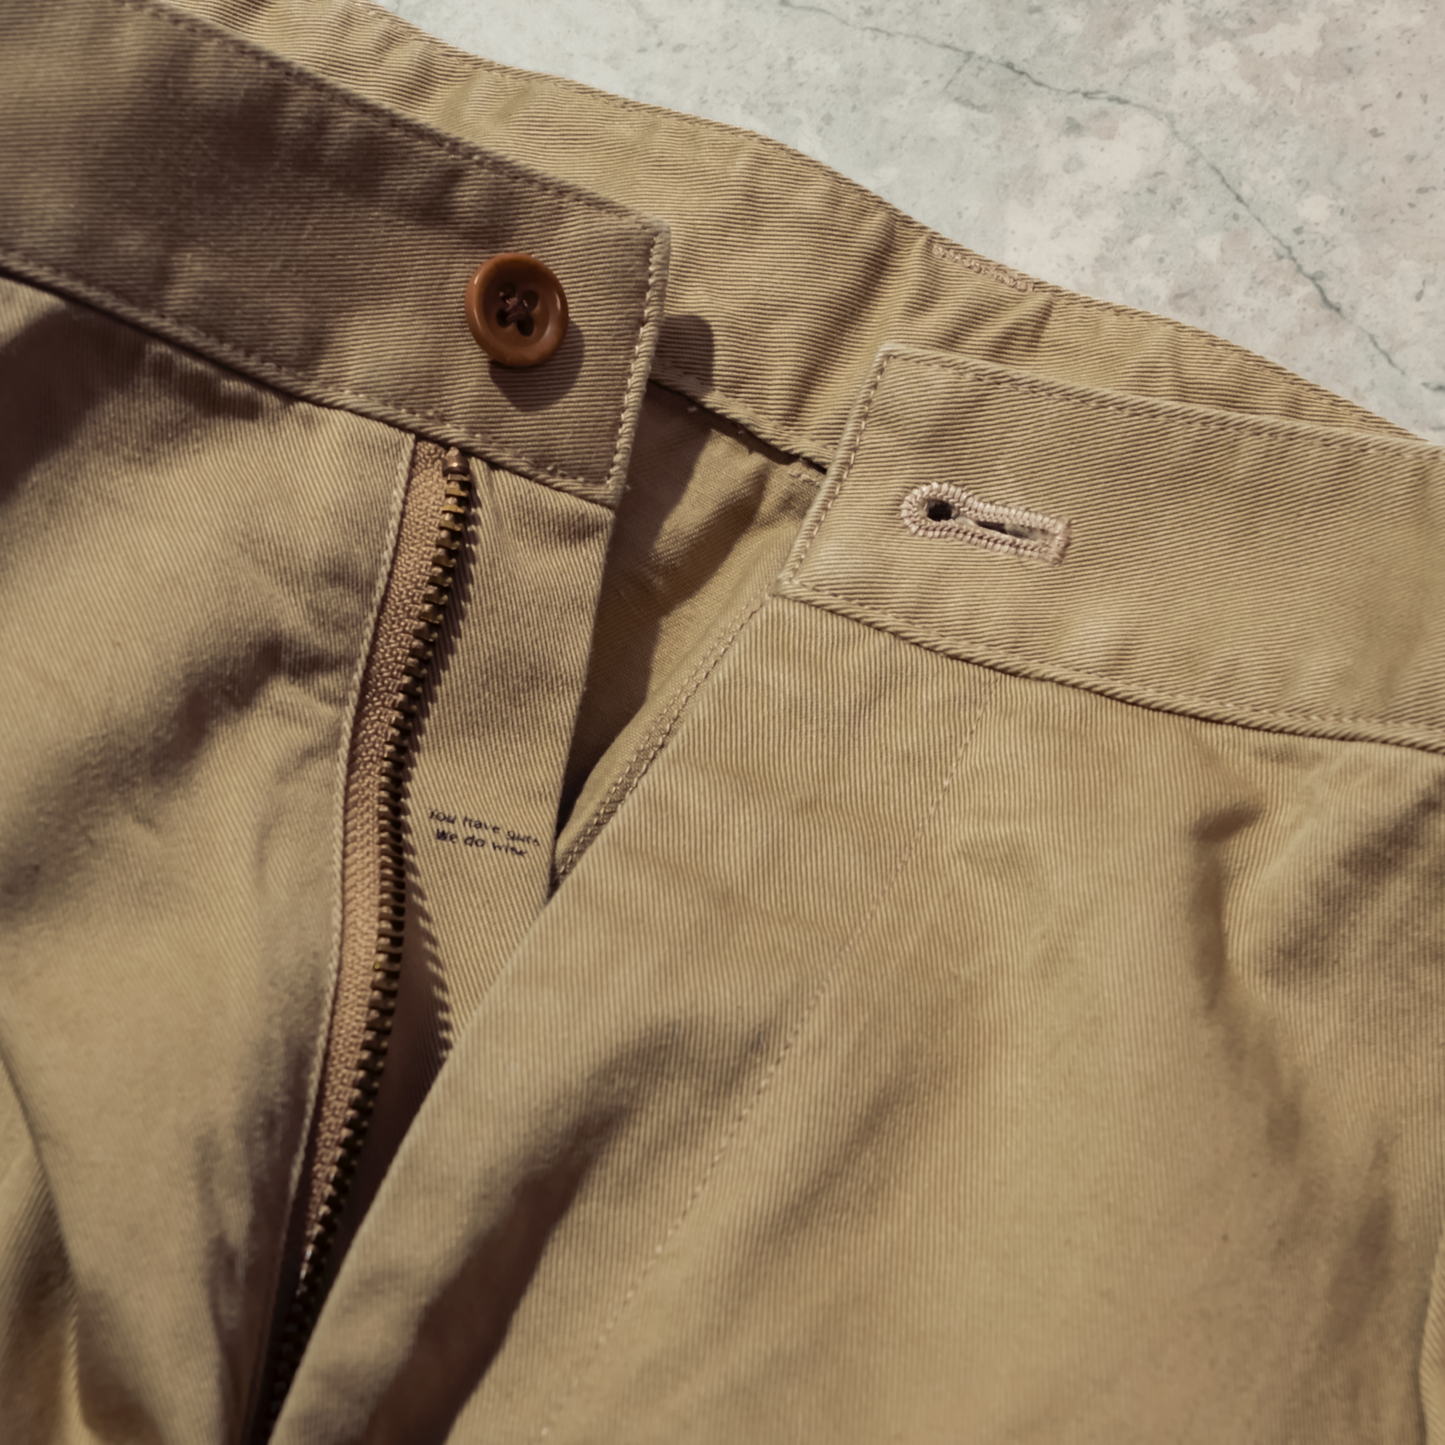 Heavy Cotton Chino Trousers